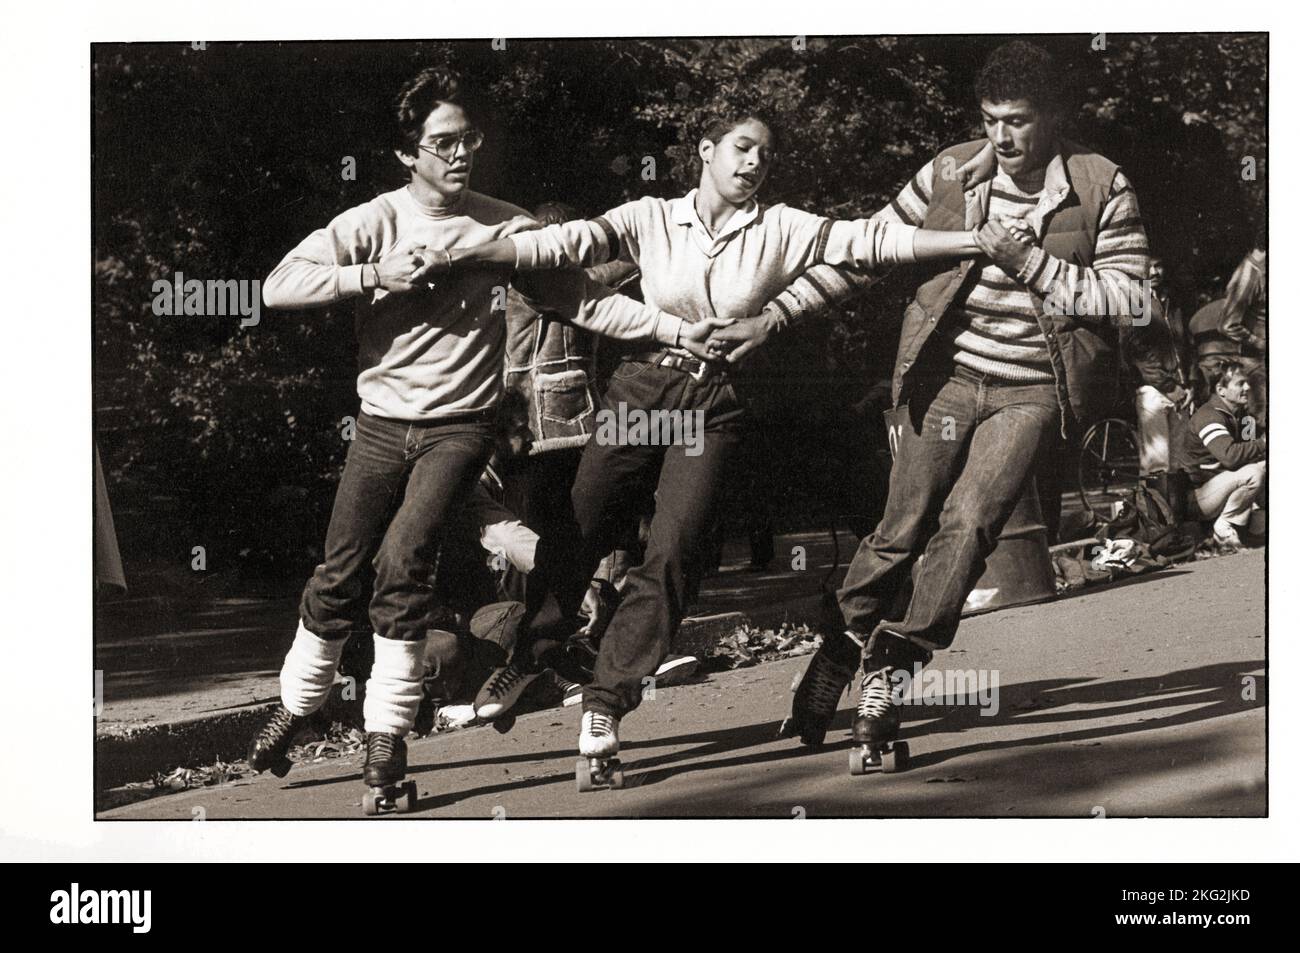 Synchronized roller skaters take a spin in Central Park, in Manhattan. From the late 70s or early 80s. Stock Photo